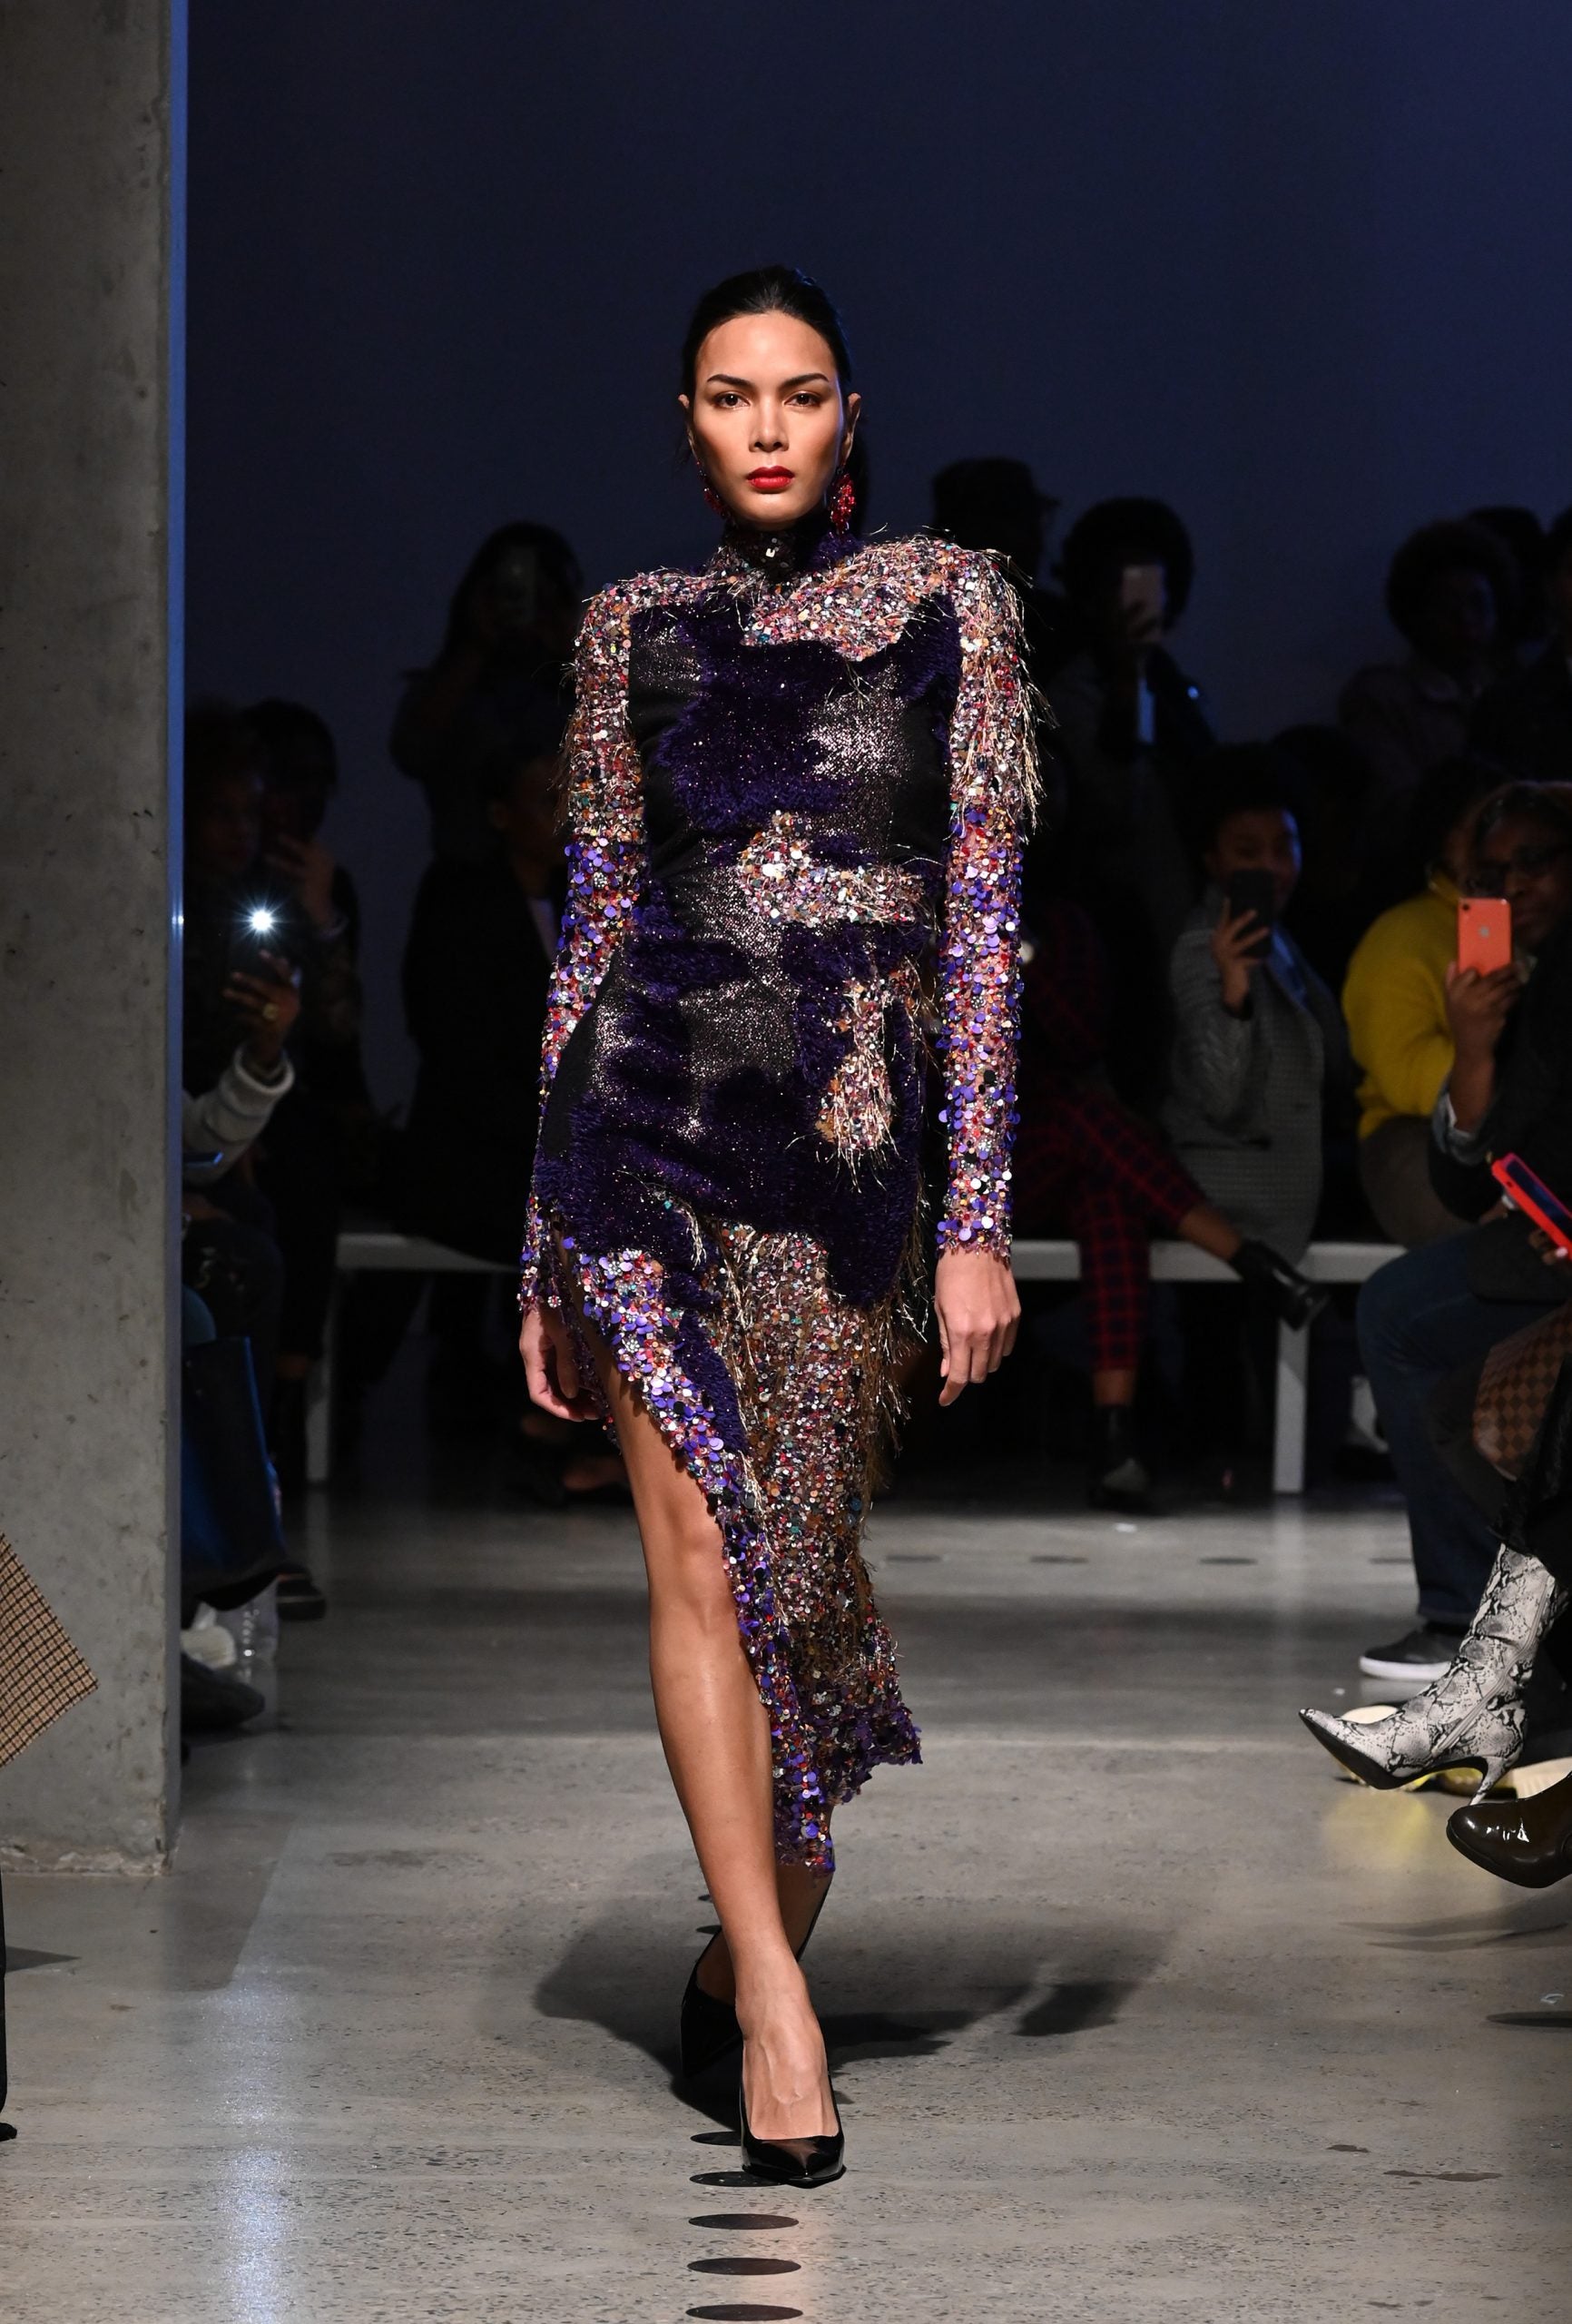 Esé Azénabor Presents Fall/Winter 2020 Collection At ESSENCE Fashion House